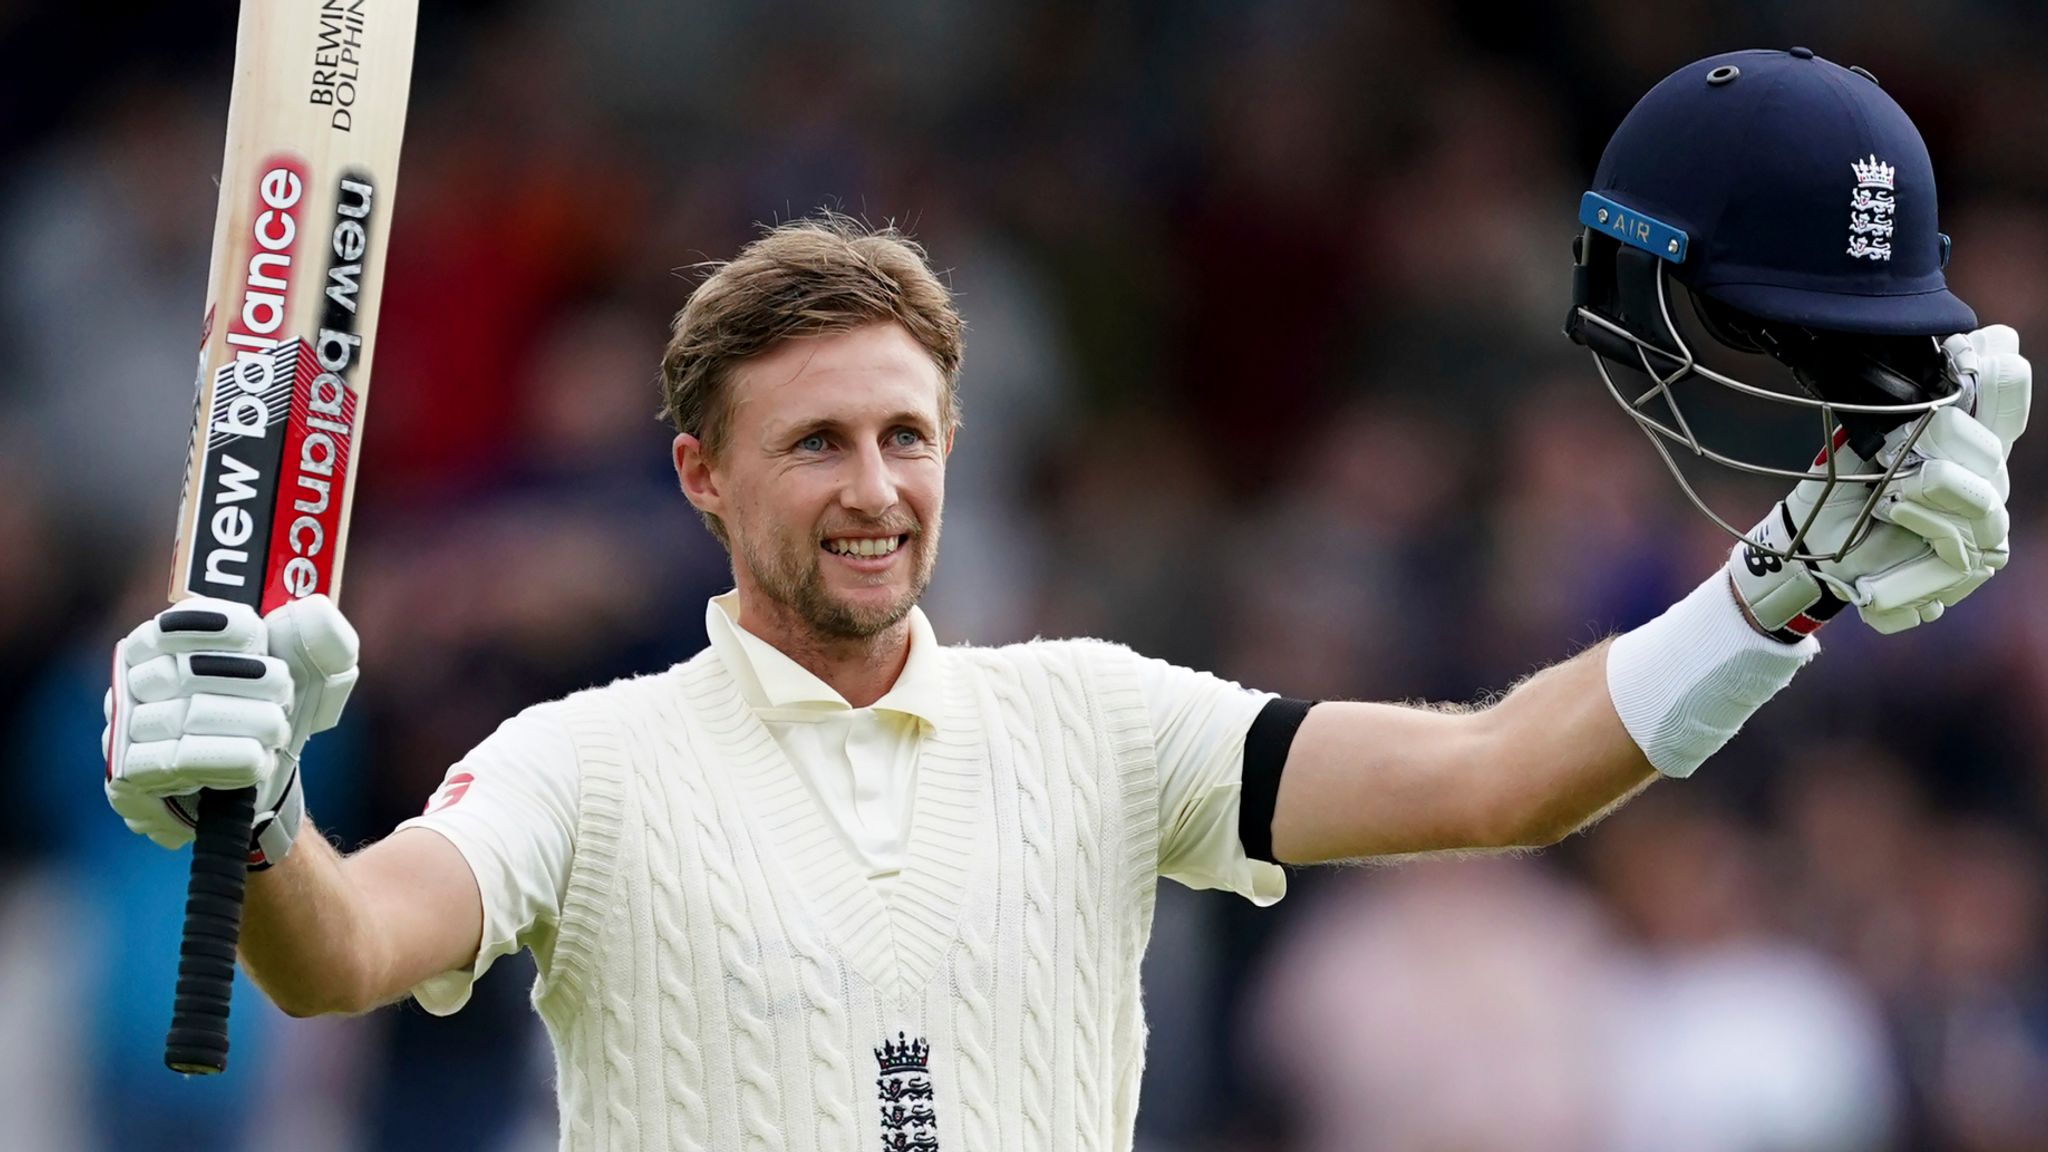 Joe Root: Why is England captain moving back to No 3 after career-best year at No 4? | Cricket News | Sky Sports